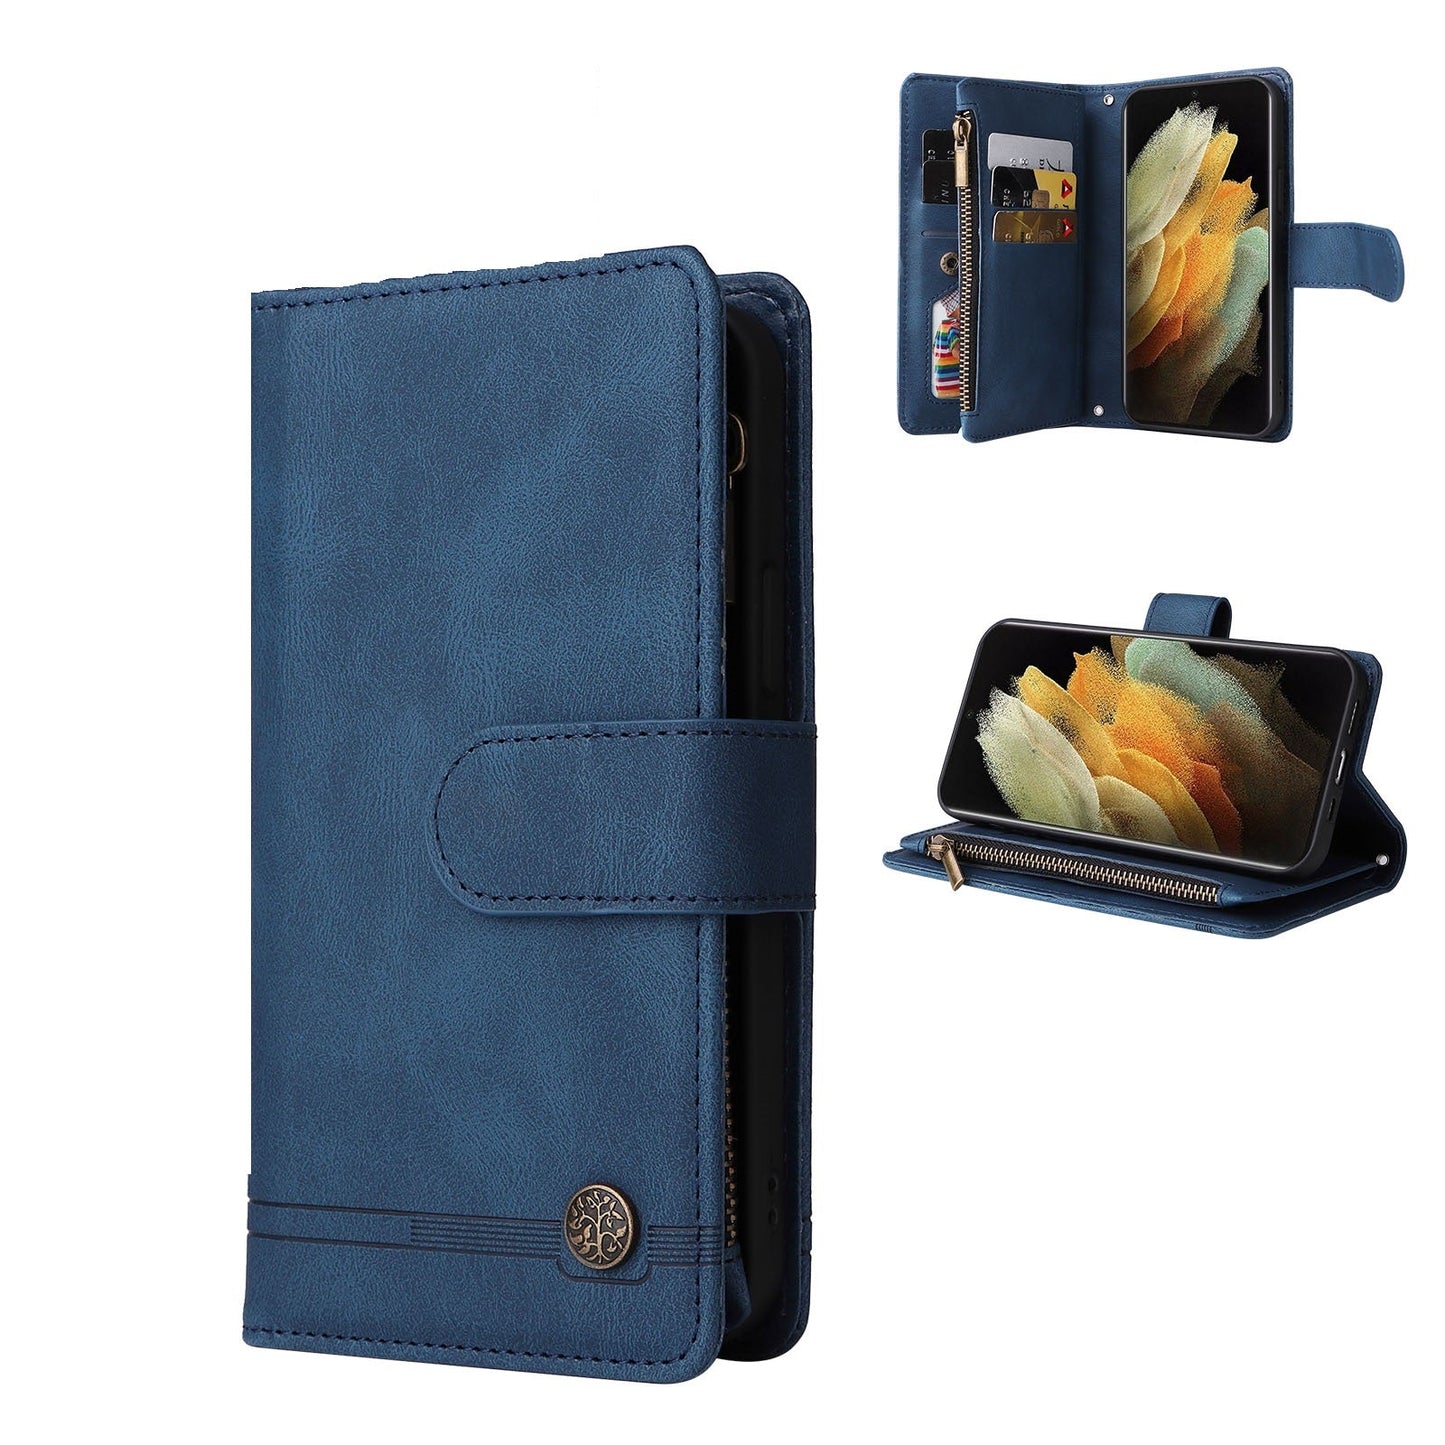 Samsung Galaxy XCover 5 Case Wallet Cover Blue